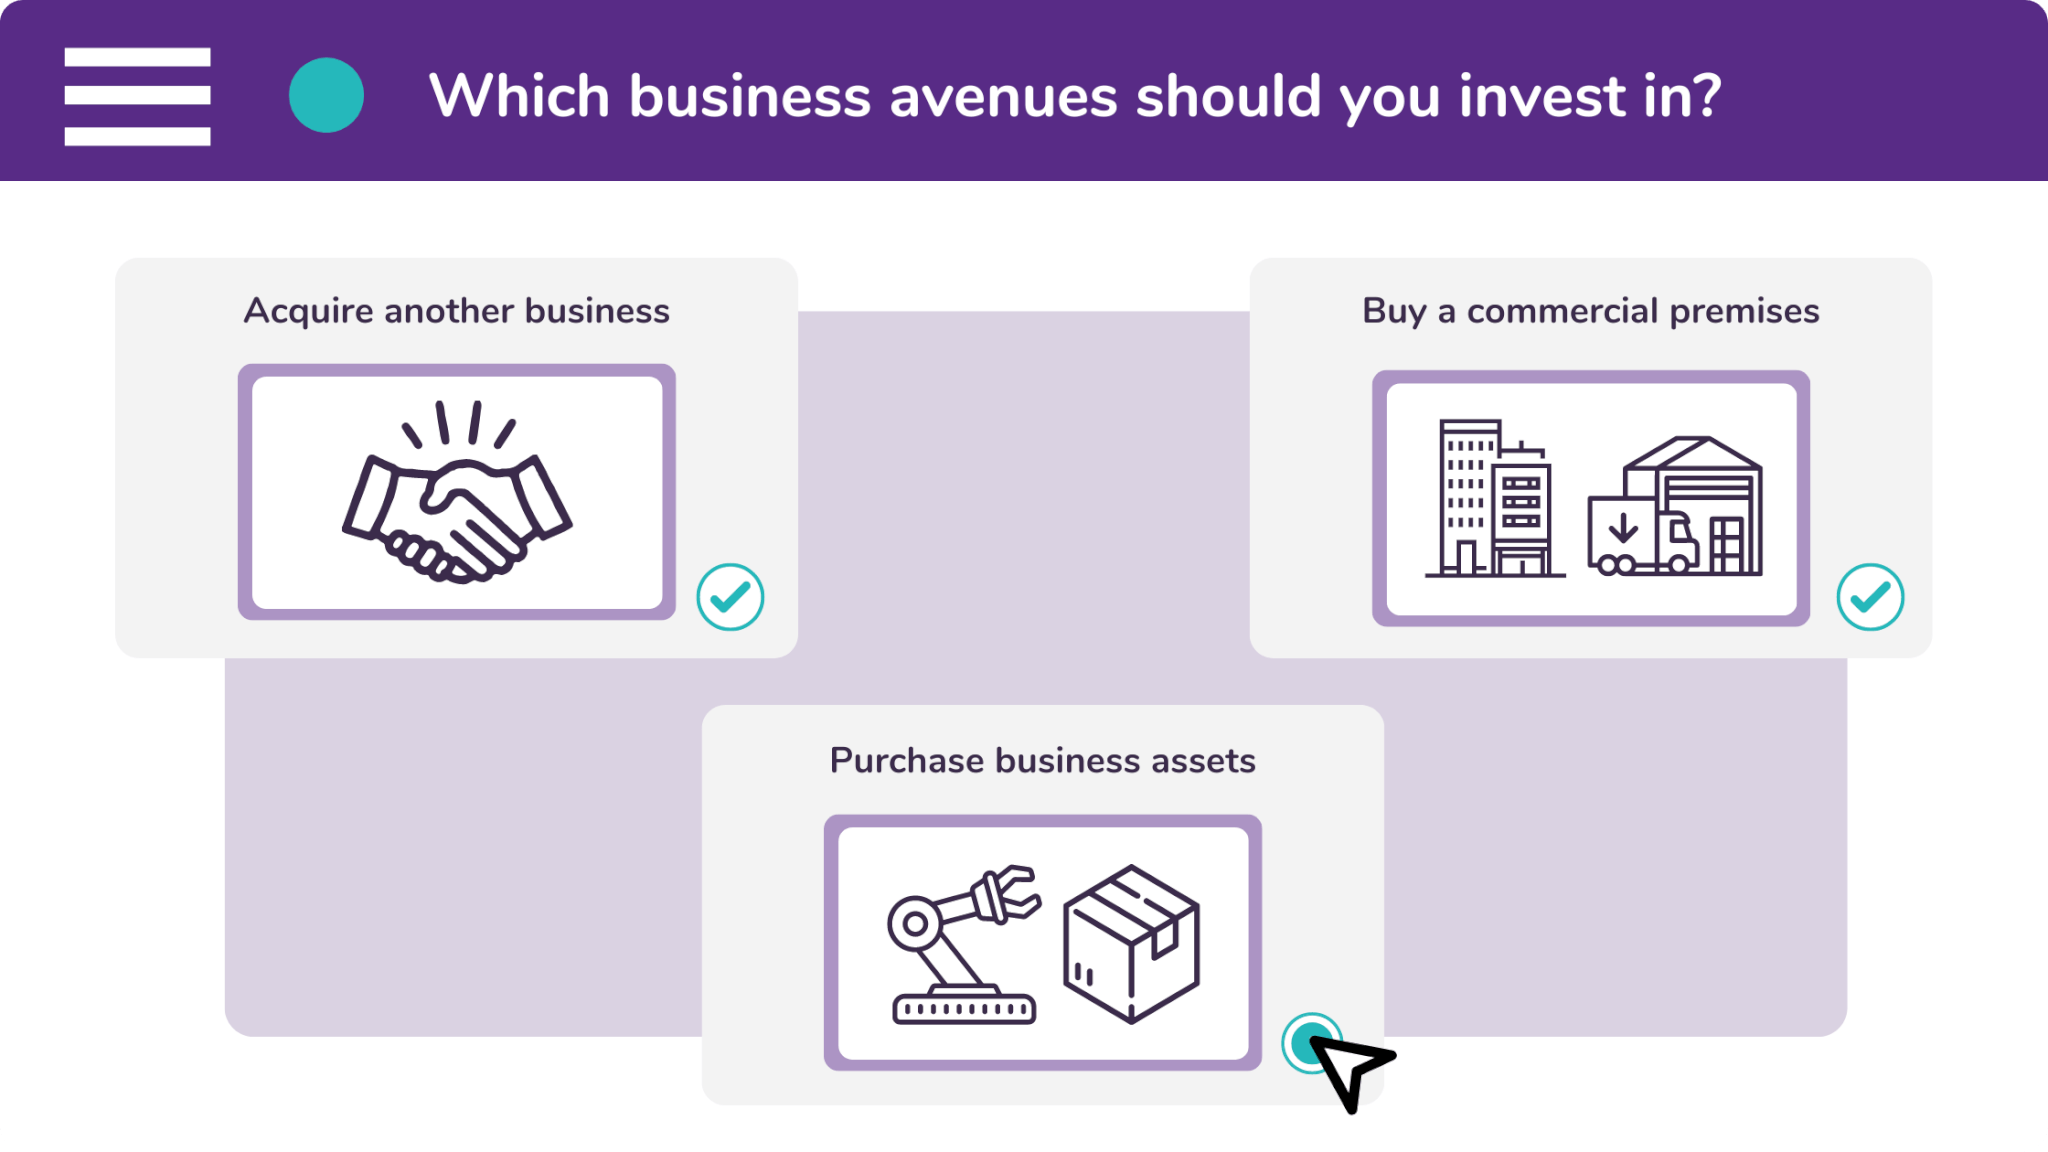 You should consider investing in a new business, a commercial premises, and new company assets.